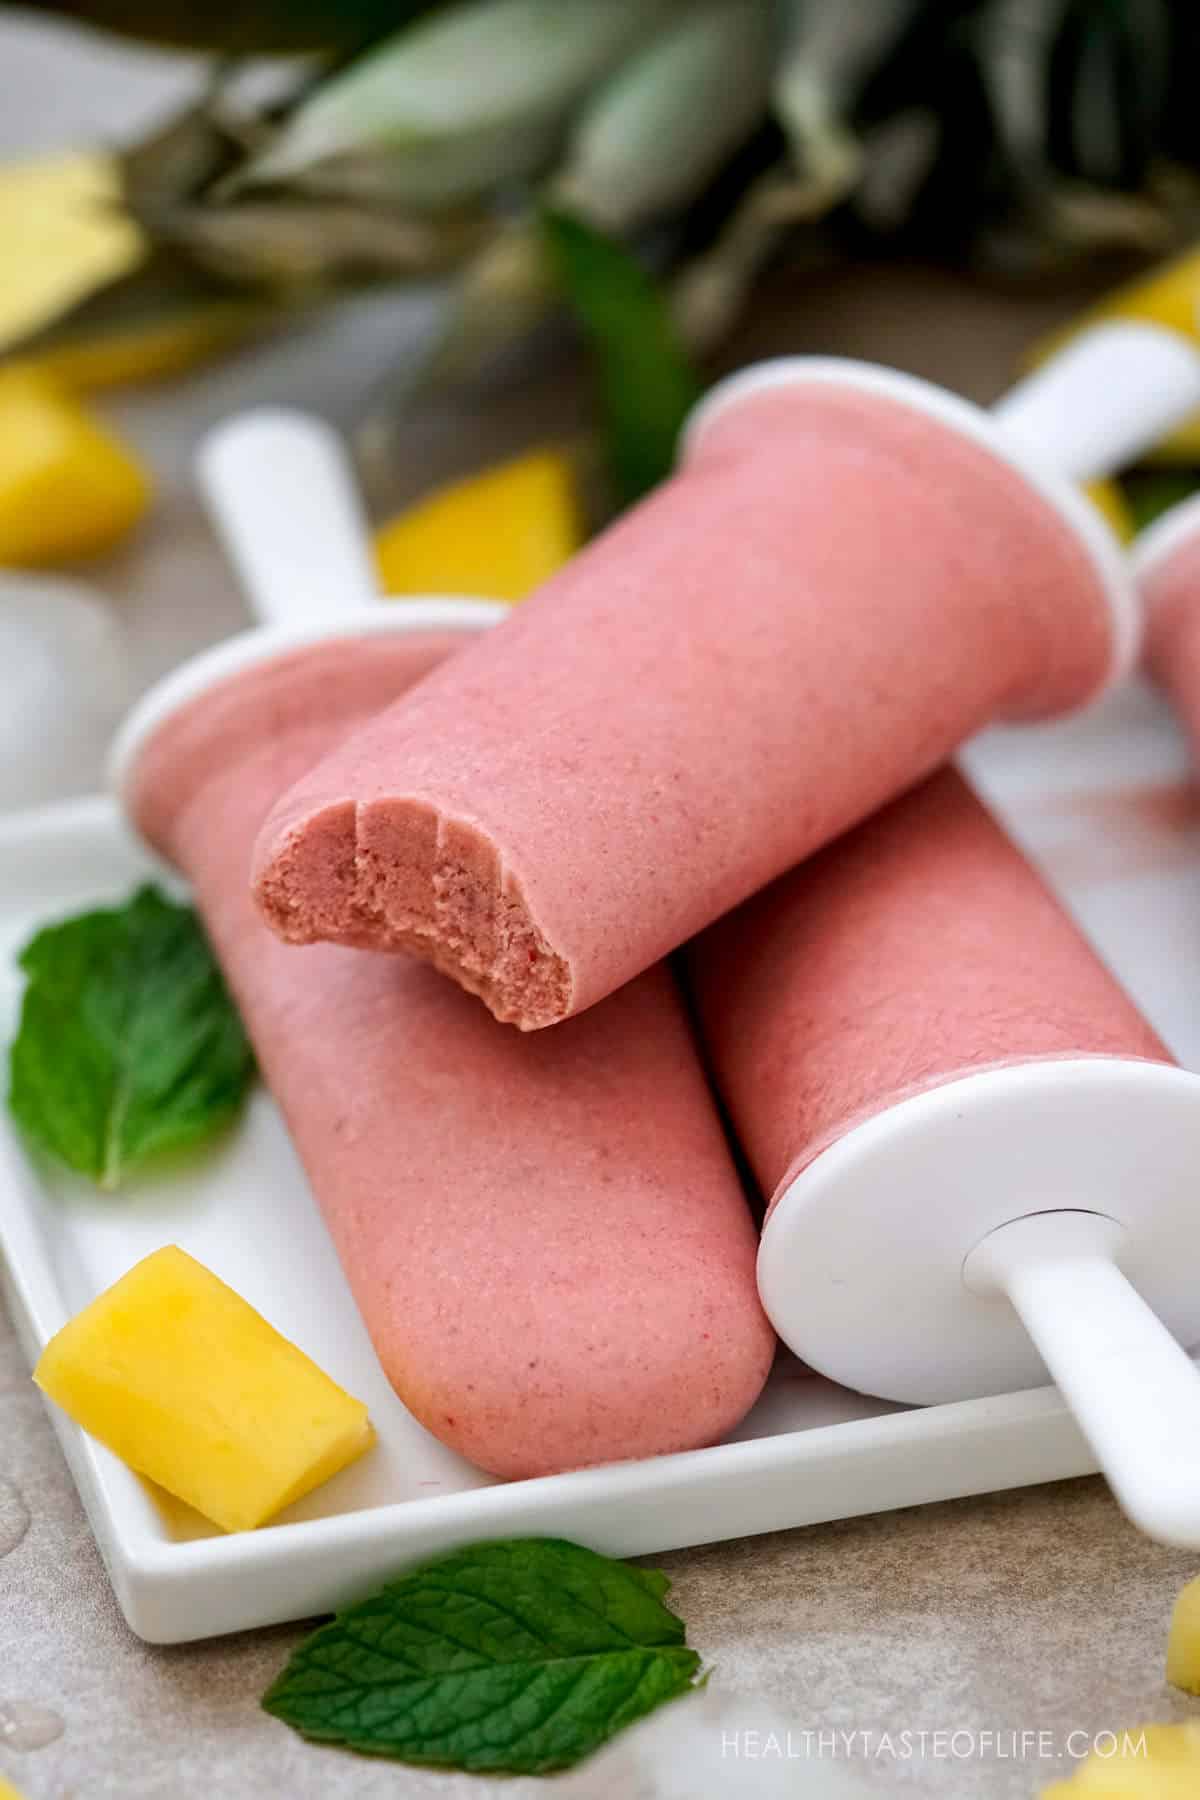 Healthy tropical popsicles - made with only whole fruits like mango, pineapple, banana and strawberry, no sugar added, no juice and no dairy. These tropical fruits popsicles are not overly sweet, but creamy - perfect for kids or adults during hot summer days. #popsicles #popsiclesrecipe #sugarfreepopsicles #tropicalpopsicles #dairyfreepopsicles #tropicalicepops #popsiclesideas